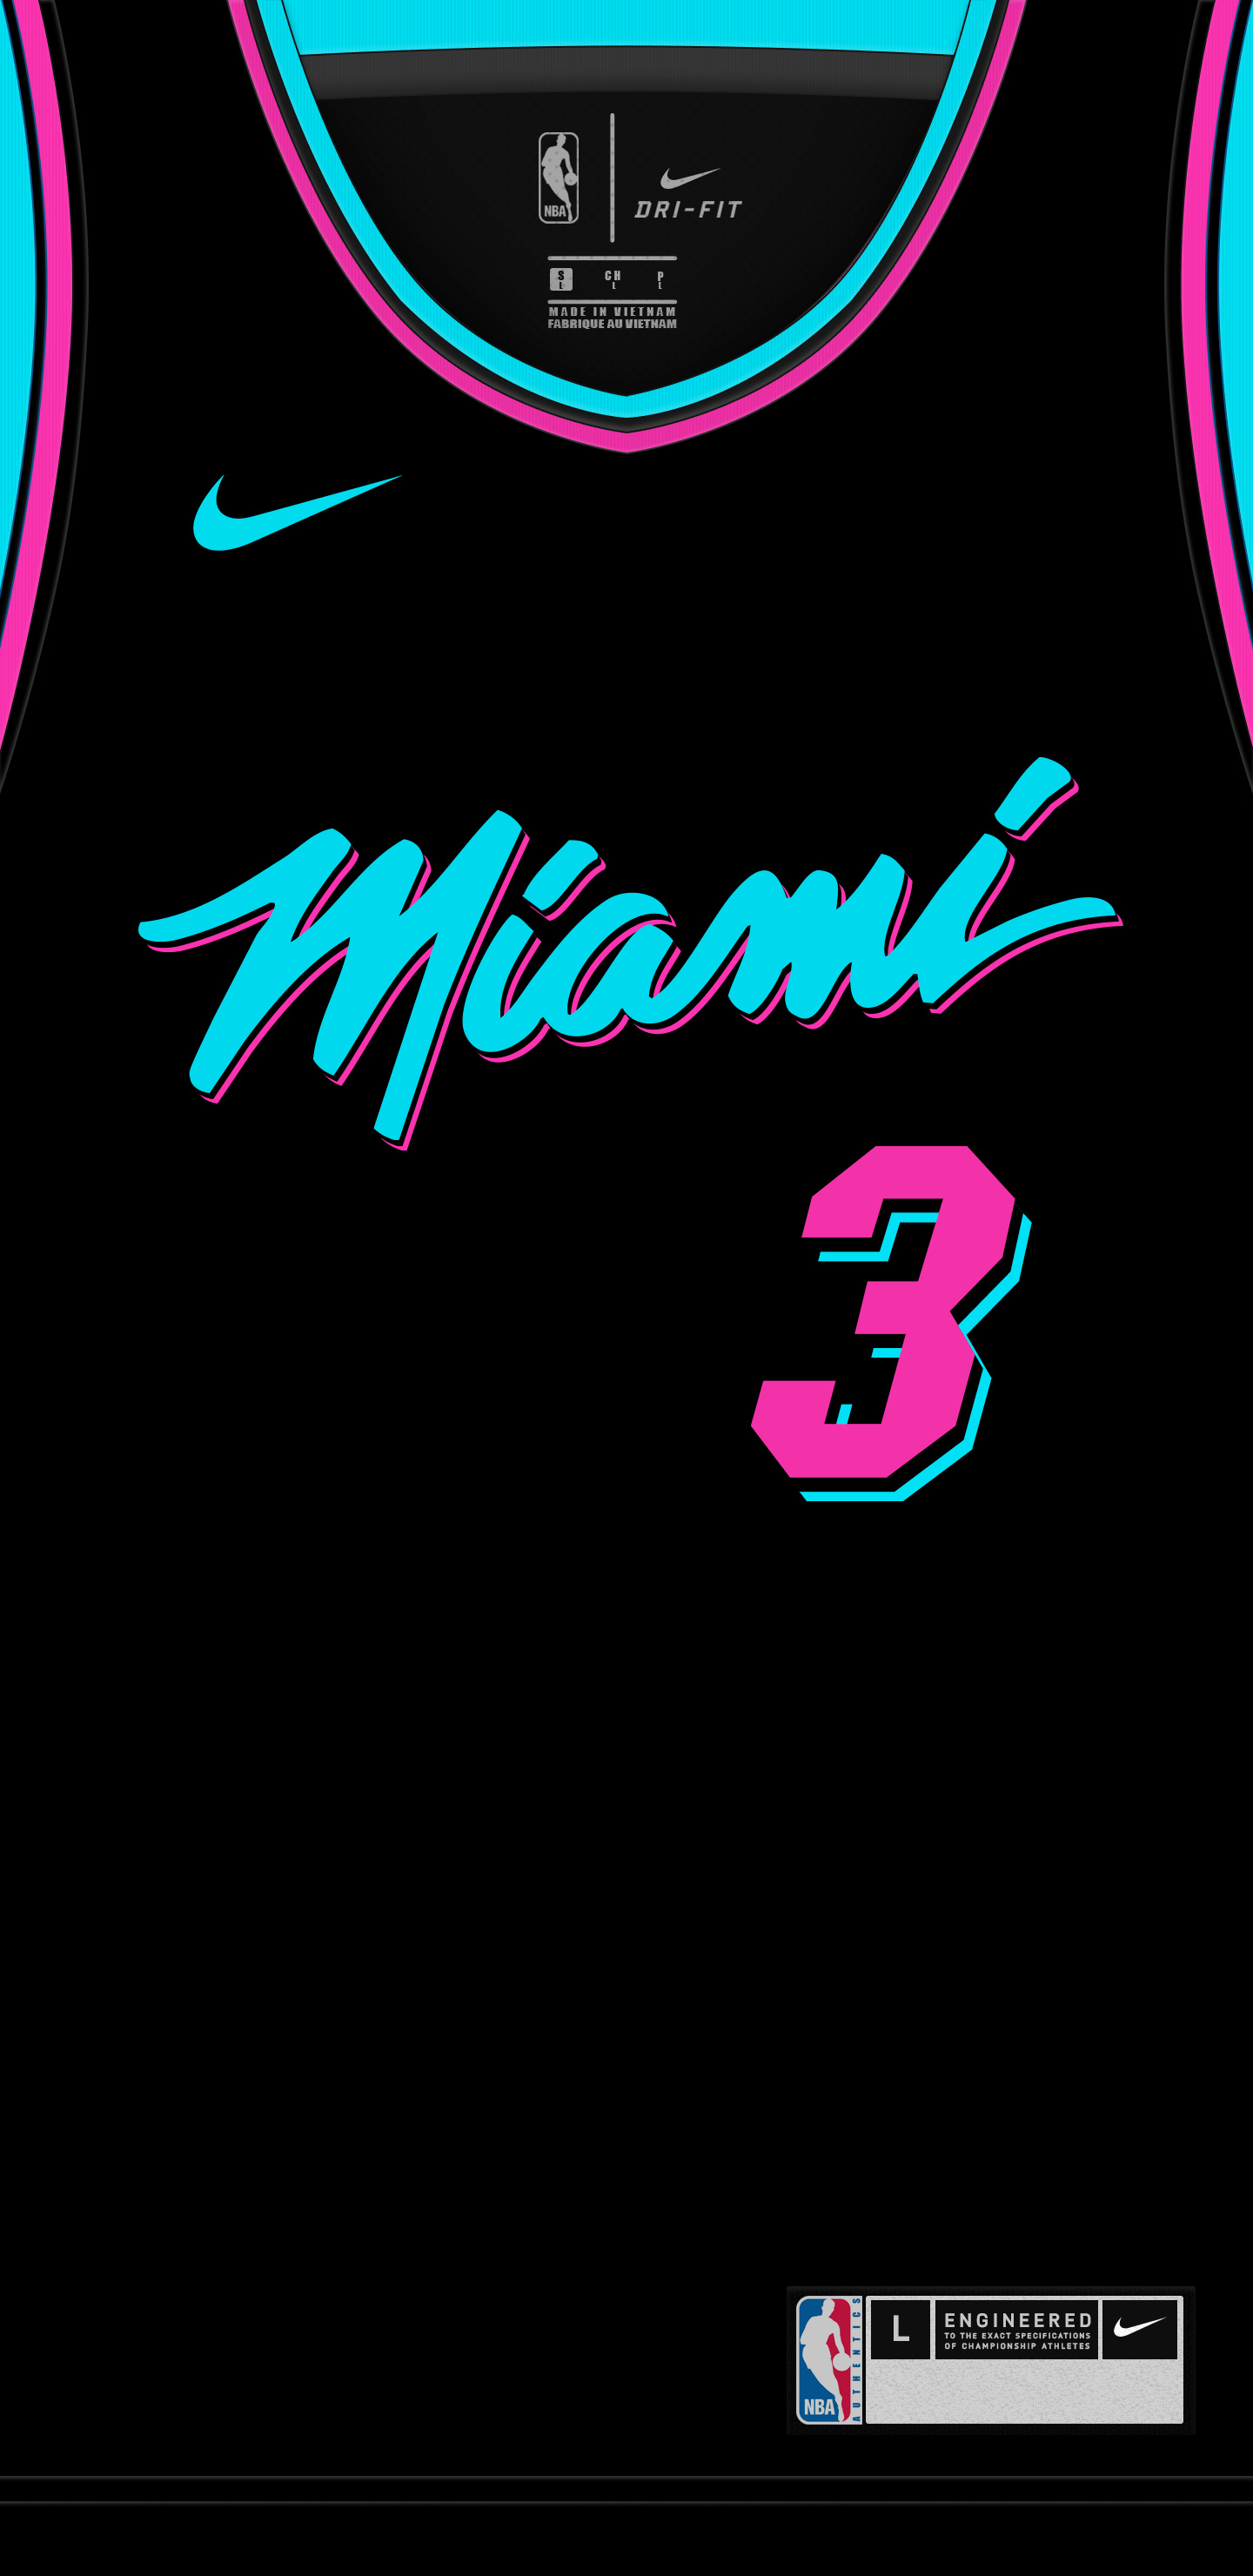 Miami Heat: The team won back-to-back NBA championships in 2012 and 2013. 1440x2960 HD Background.